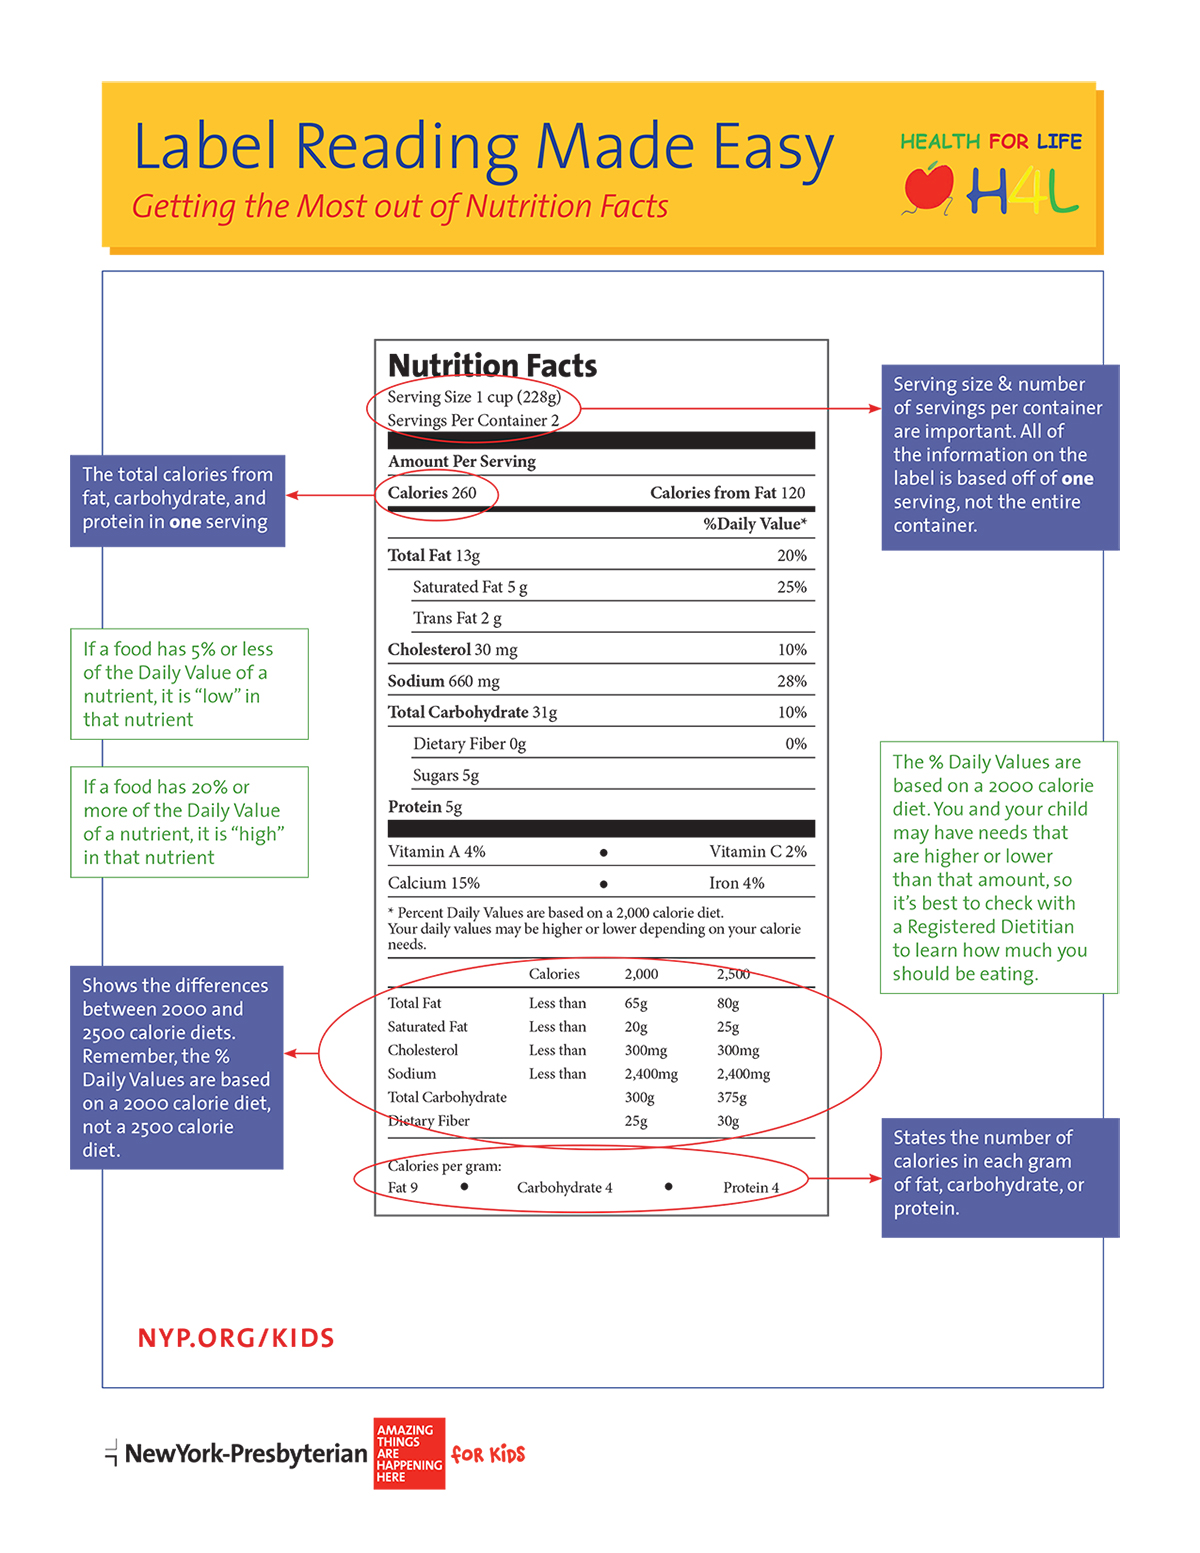 Label Reading Made Easy: Getting the Most out of Nutrition Facts